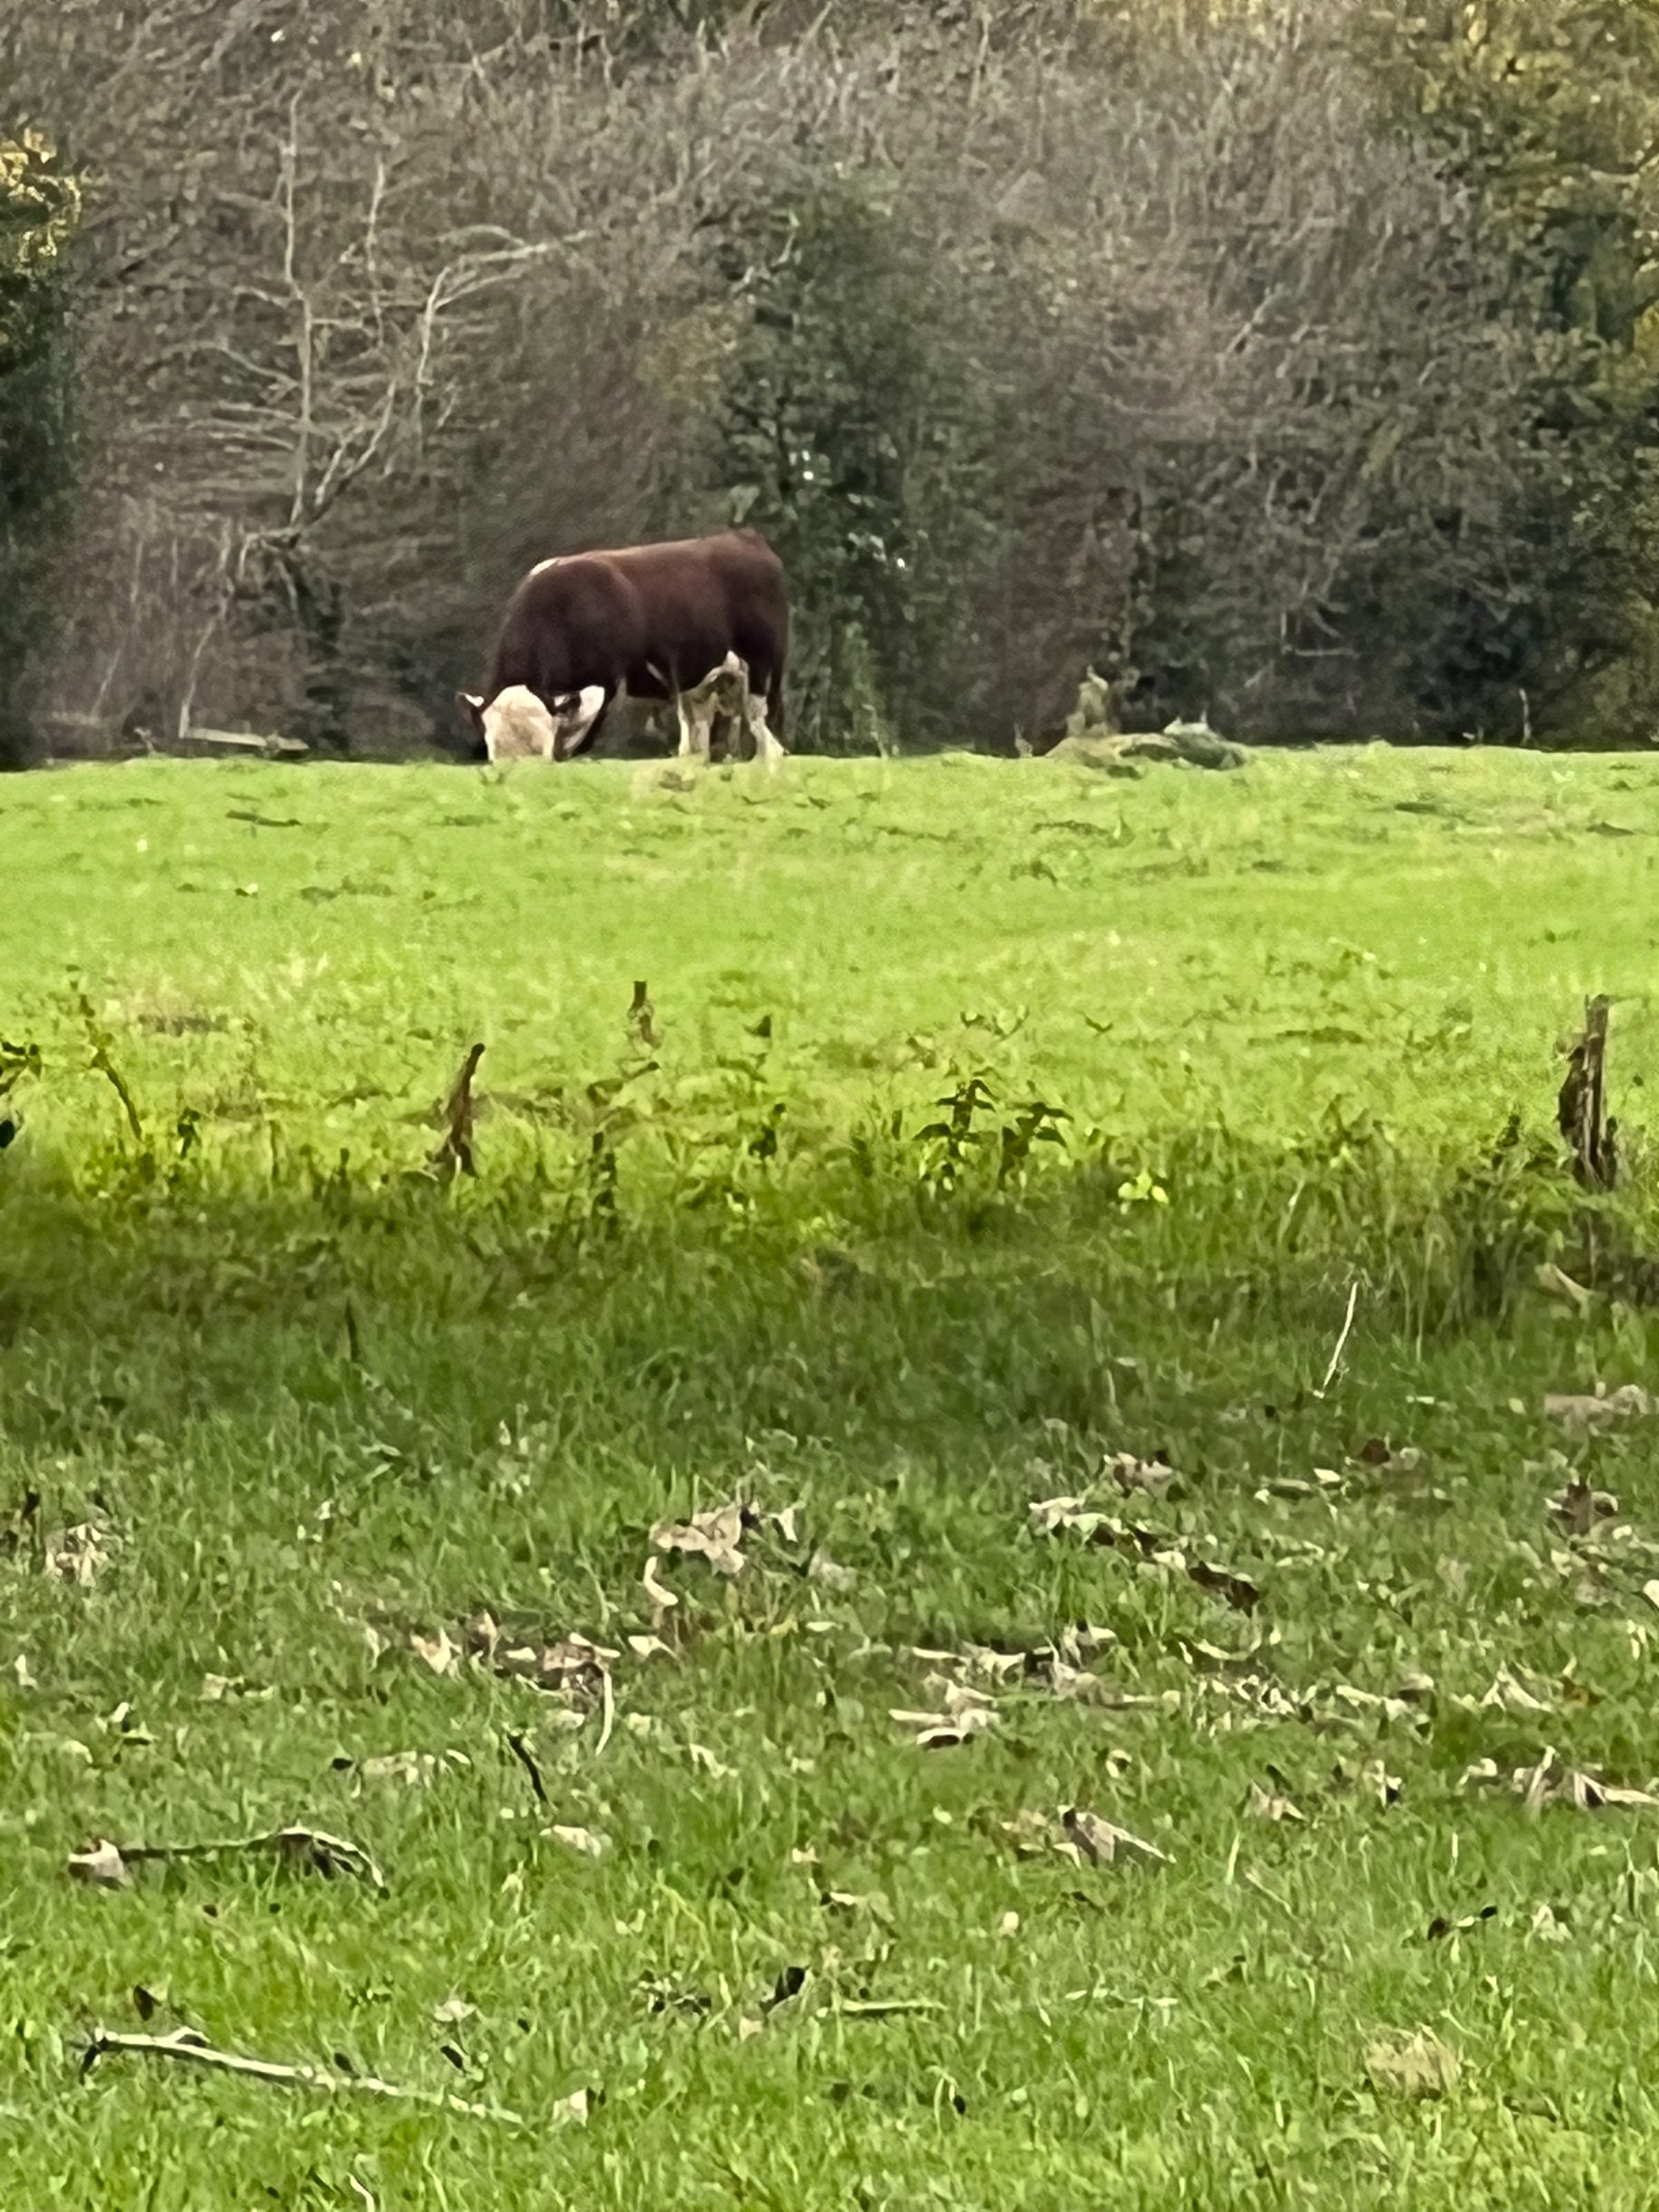 Moo
See? Livestock. Although the zoom on my phone camera really does show why people are still dragging big lenses and cameras with large sensors aroun...